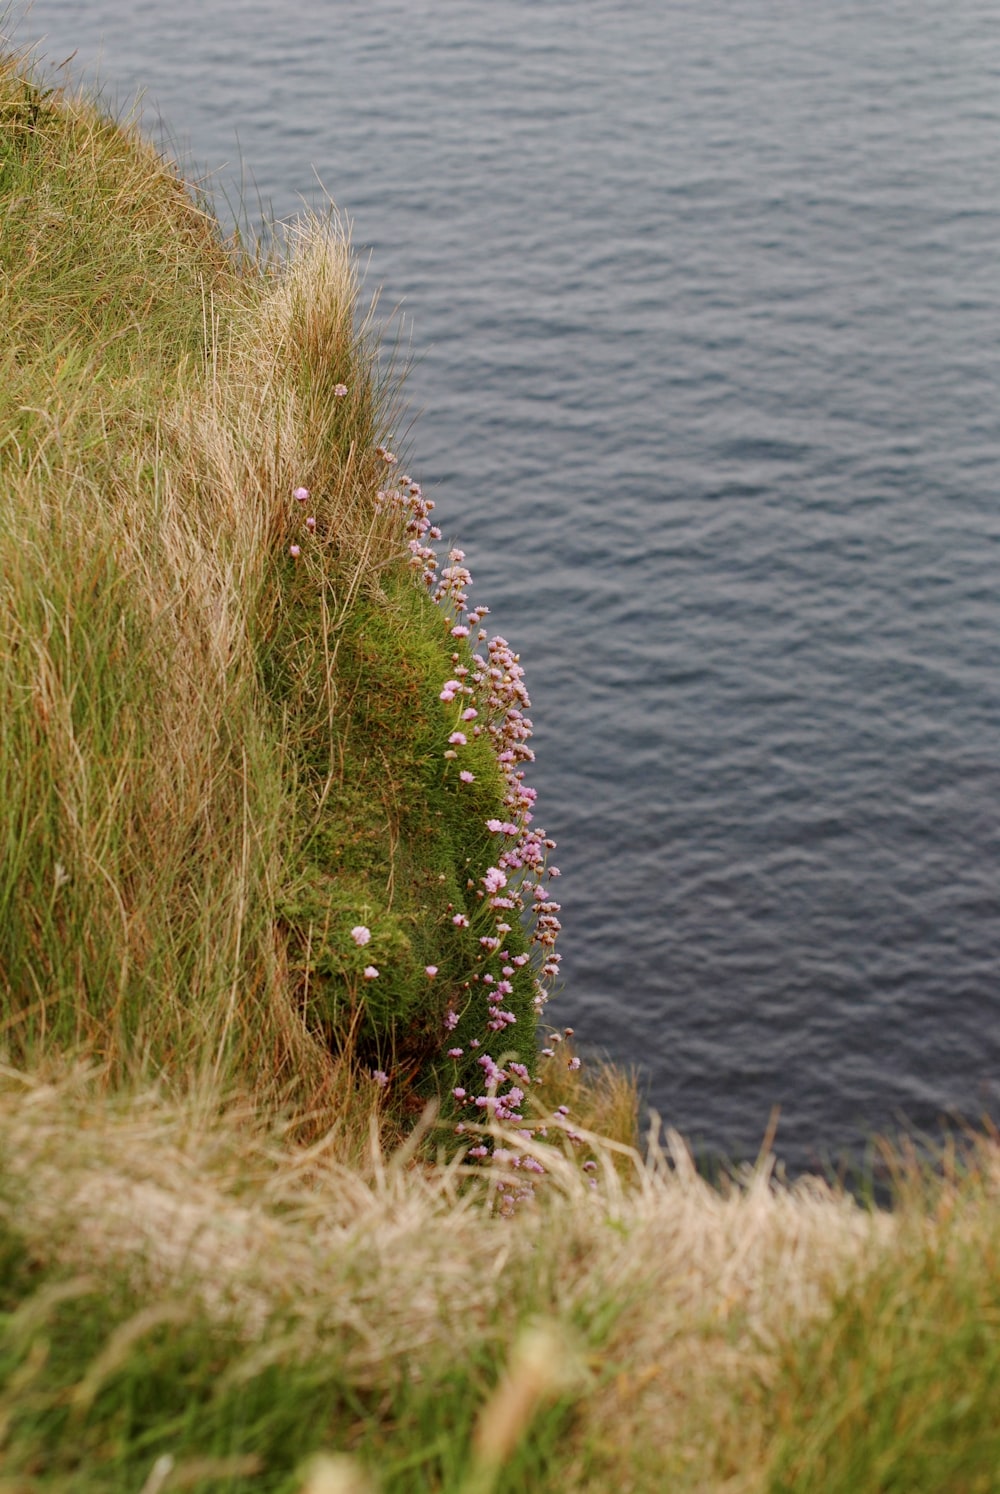 a grassy cliff with a body of water in the background